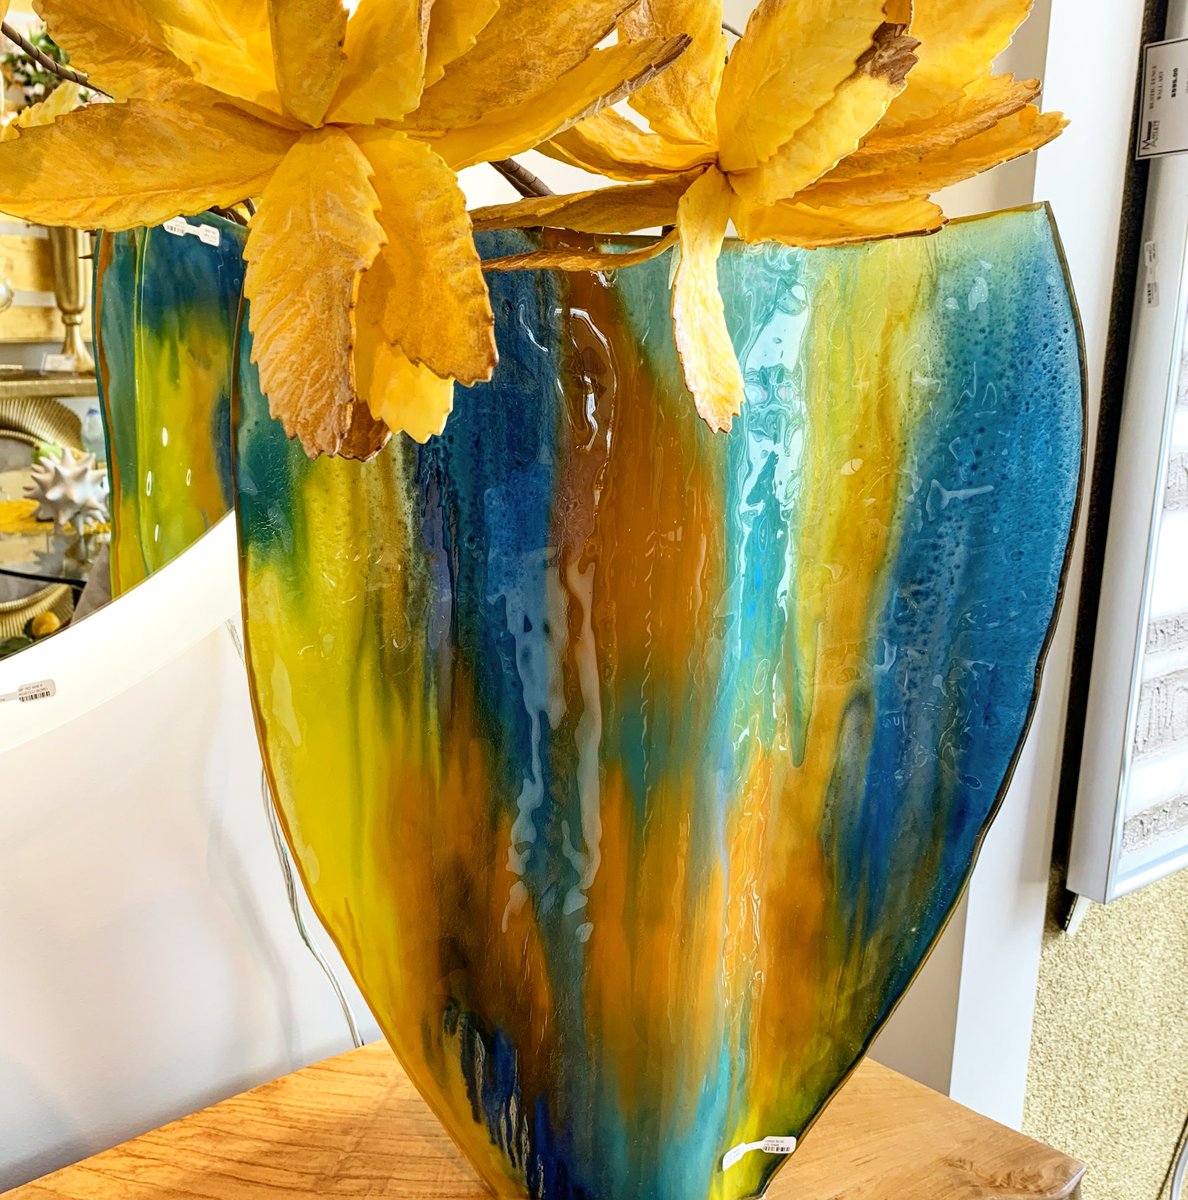 The vibrance of colour sure can awaken our spirits and home.
#colour #colourfulhome #glassaccents #colourfulvase #vibrant #homelove #vases #artisticstyle #canadianartisan #oneofakind #artistichome